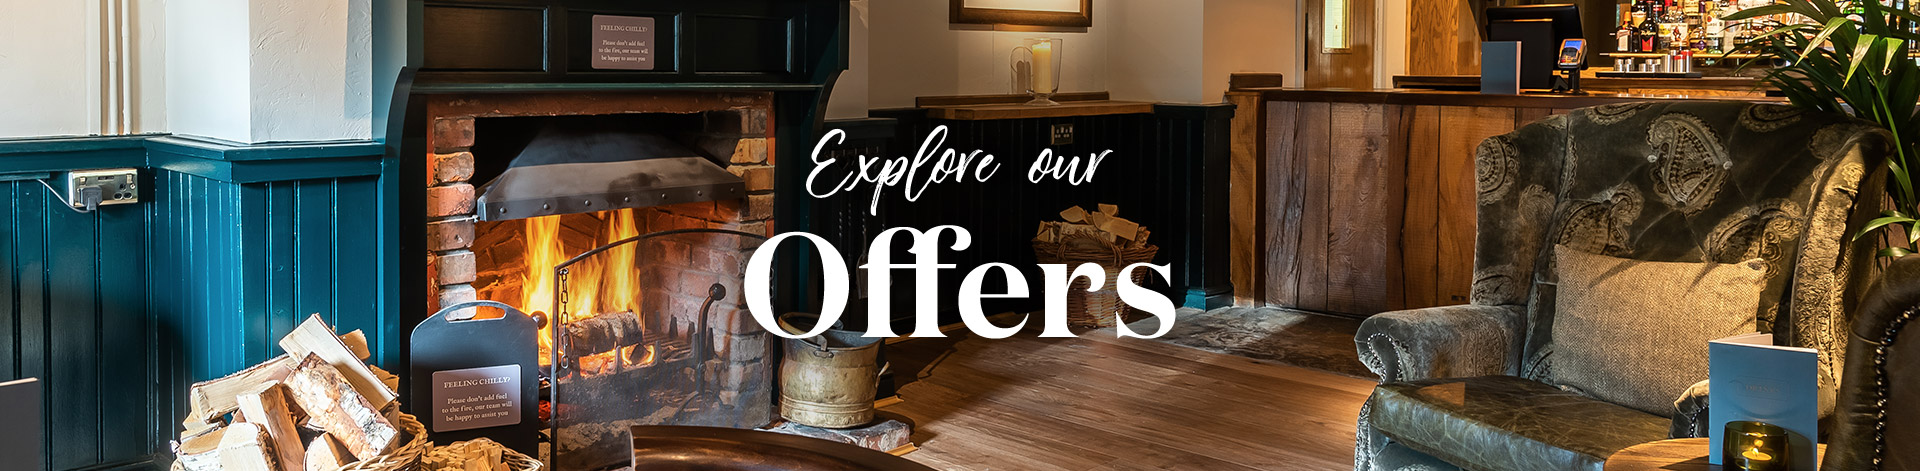 Our latest offers at The Red Kite